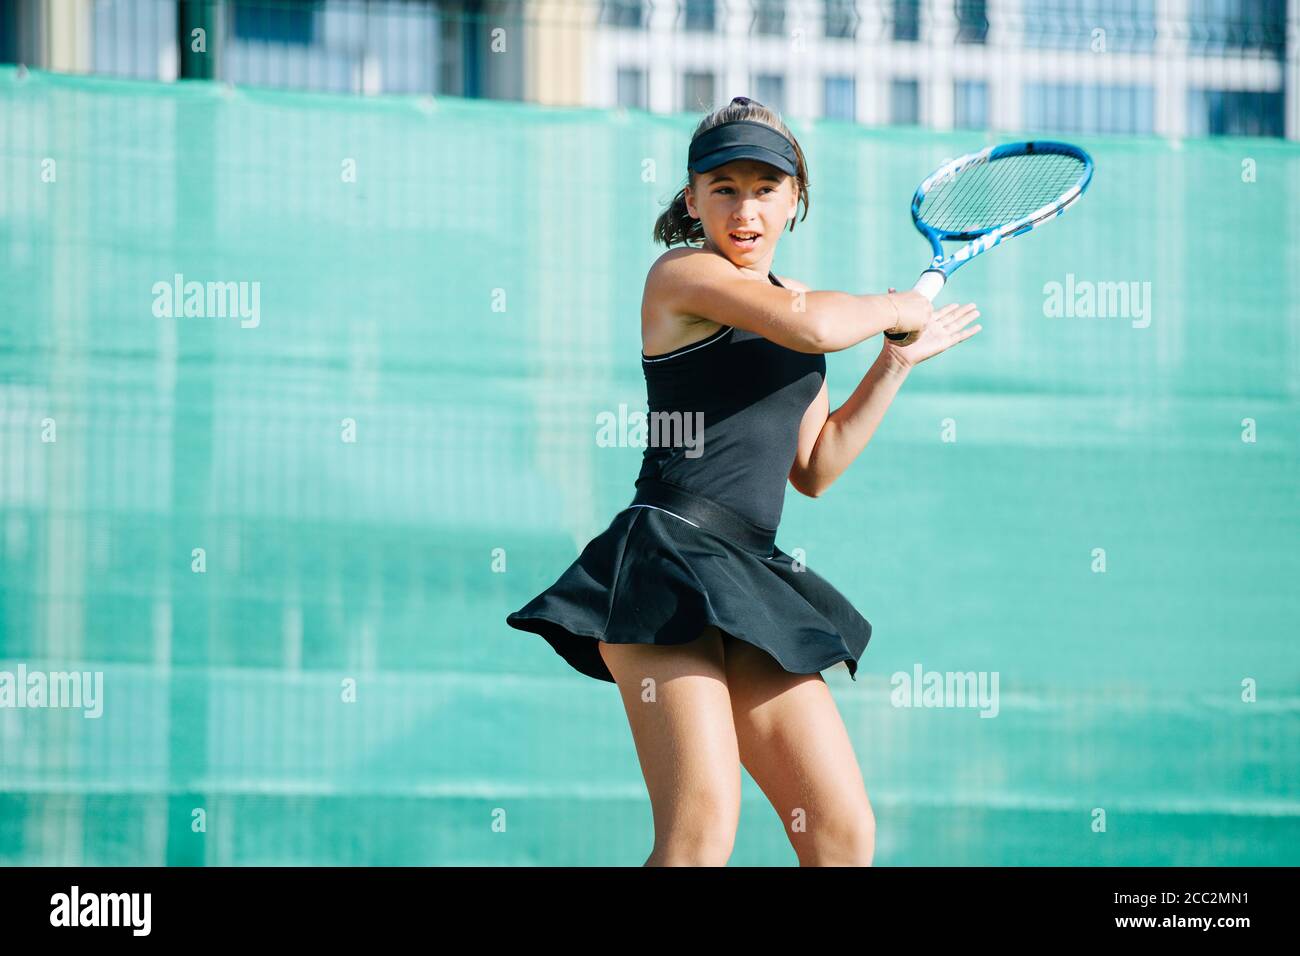 Active teenage girl playing tennis on a new court, returning ball Stock Photo